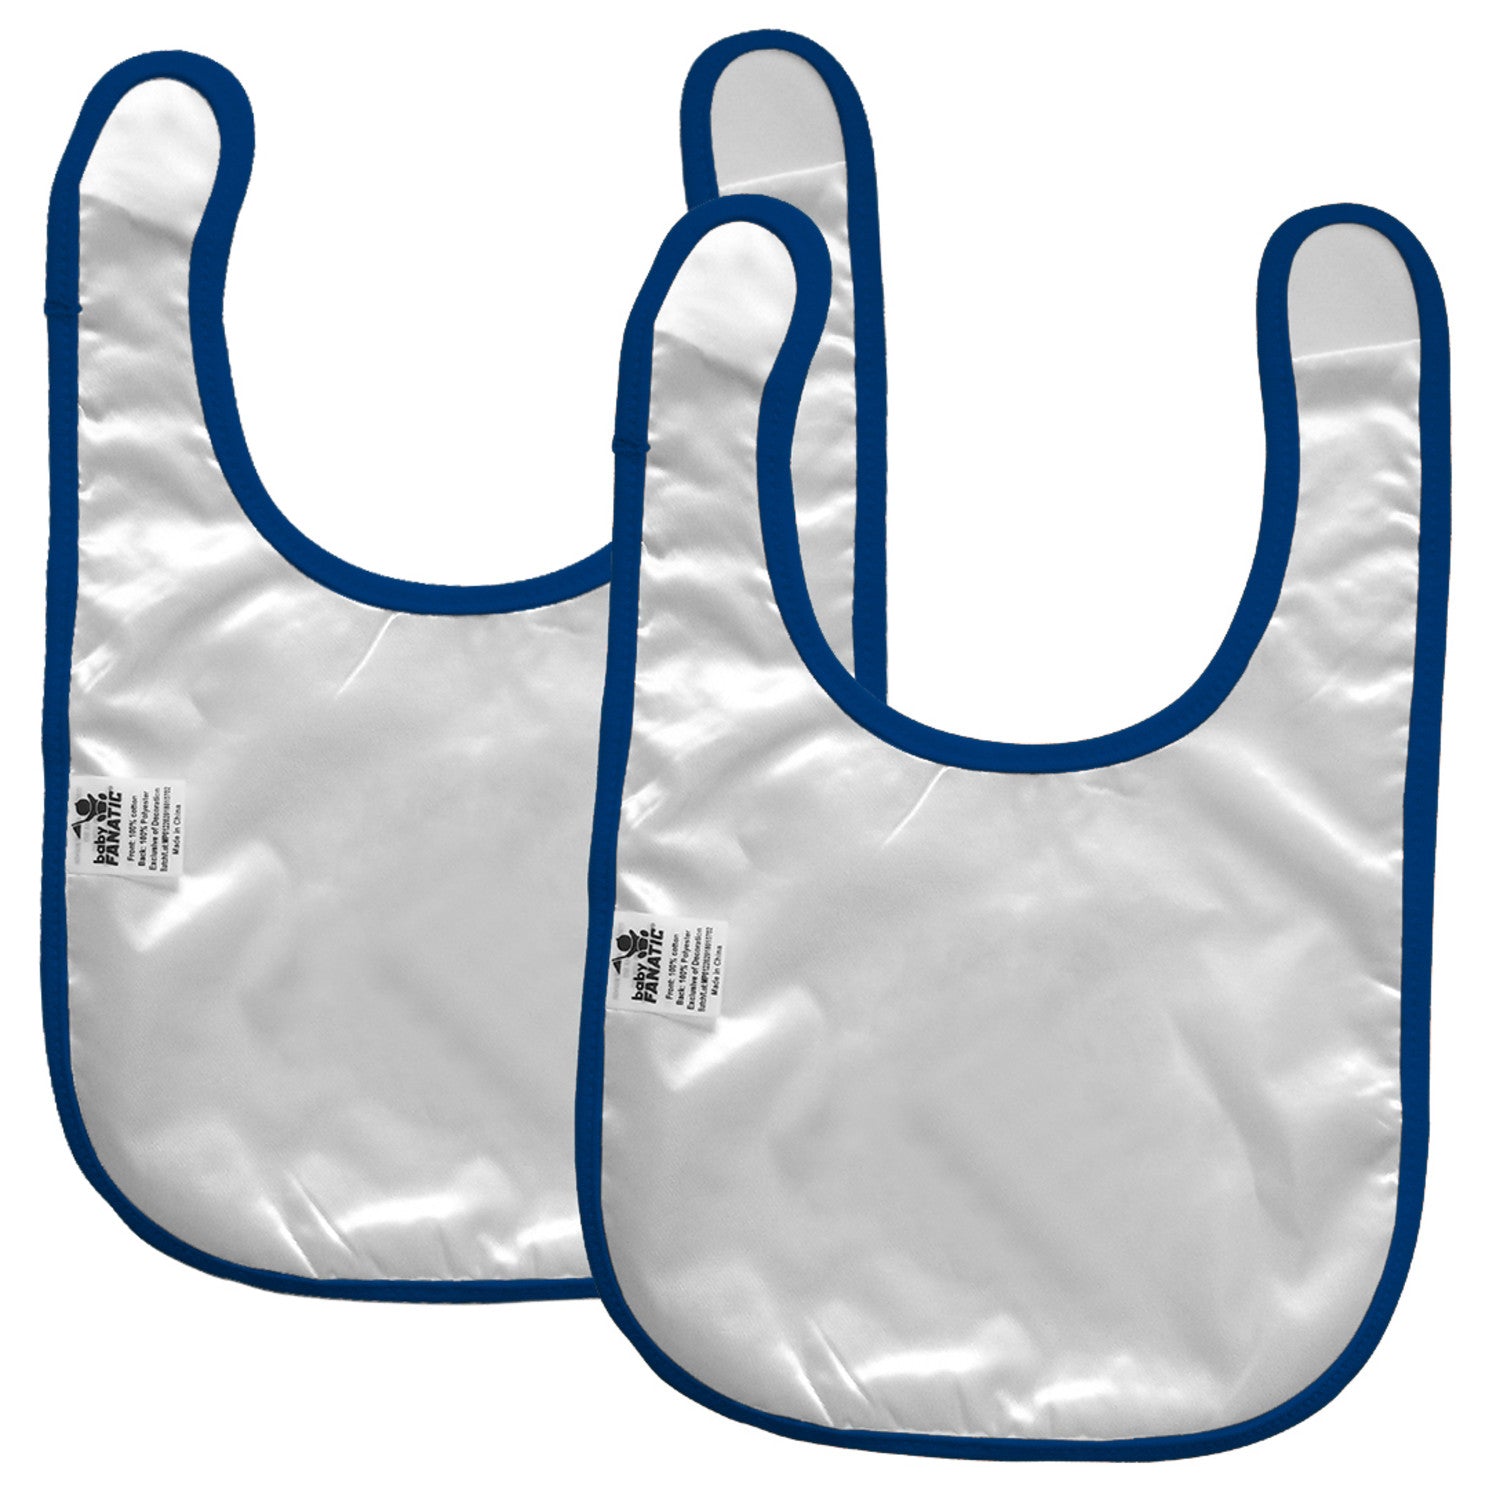 Indianapolis Colts - Baby Bibs 2-Pack